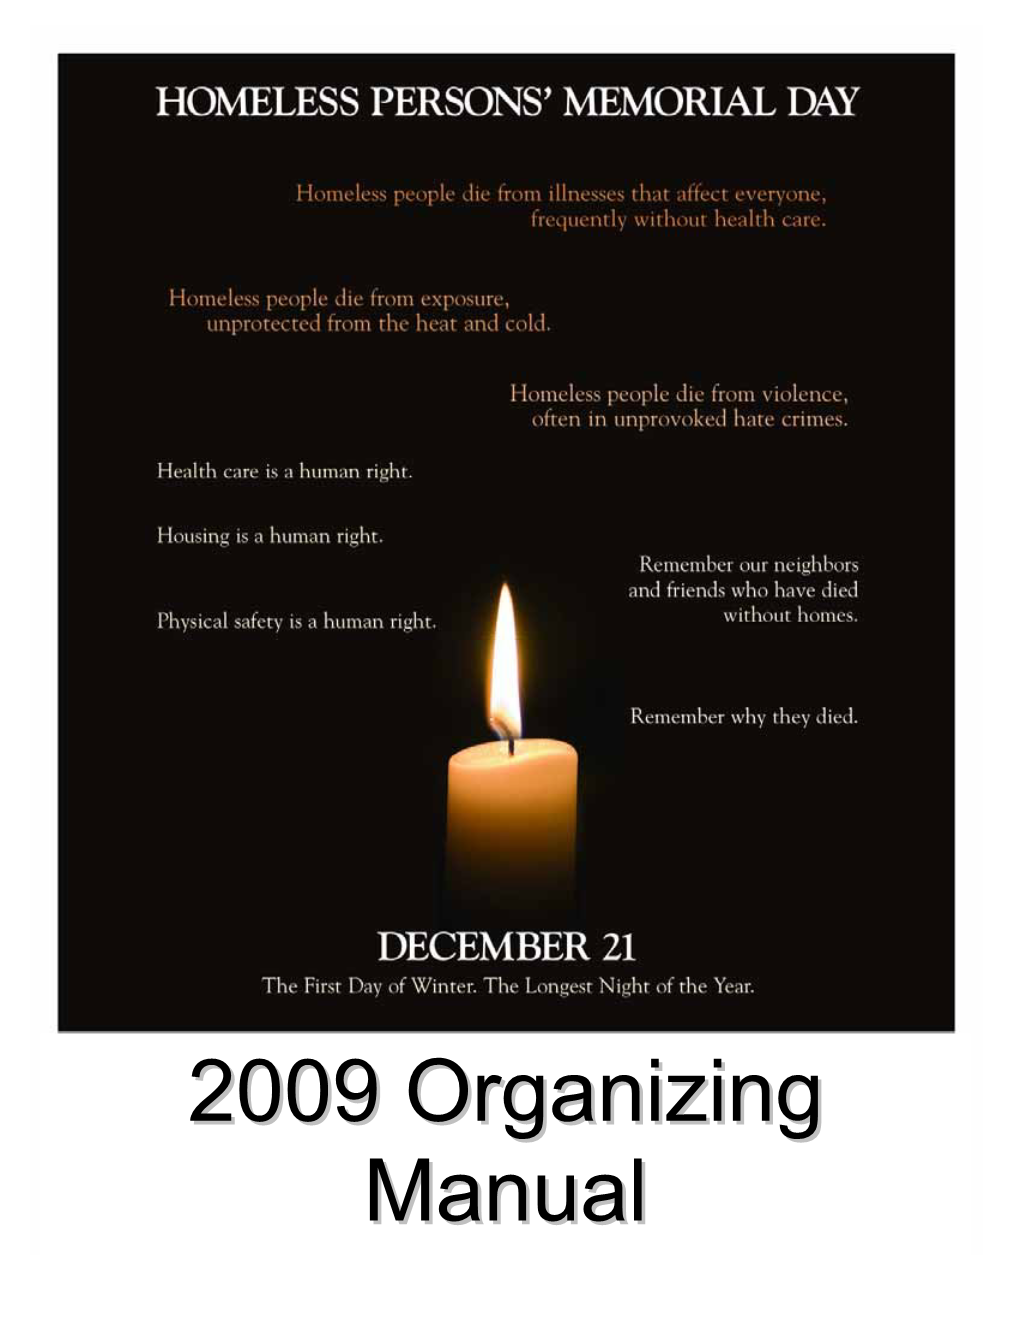 Organizing Manual National Homeless Persons' Memorial Day